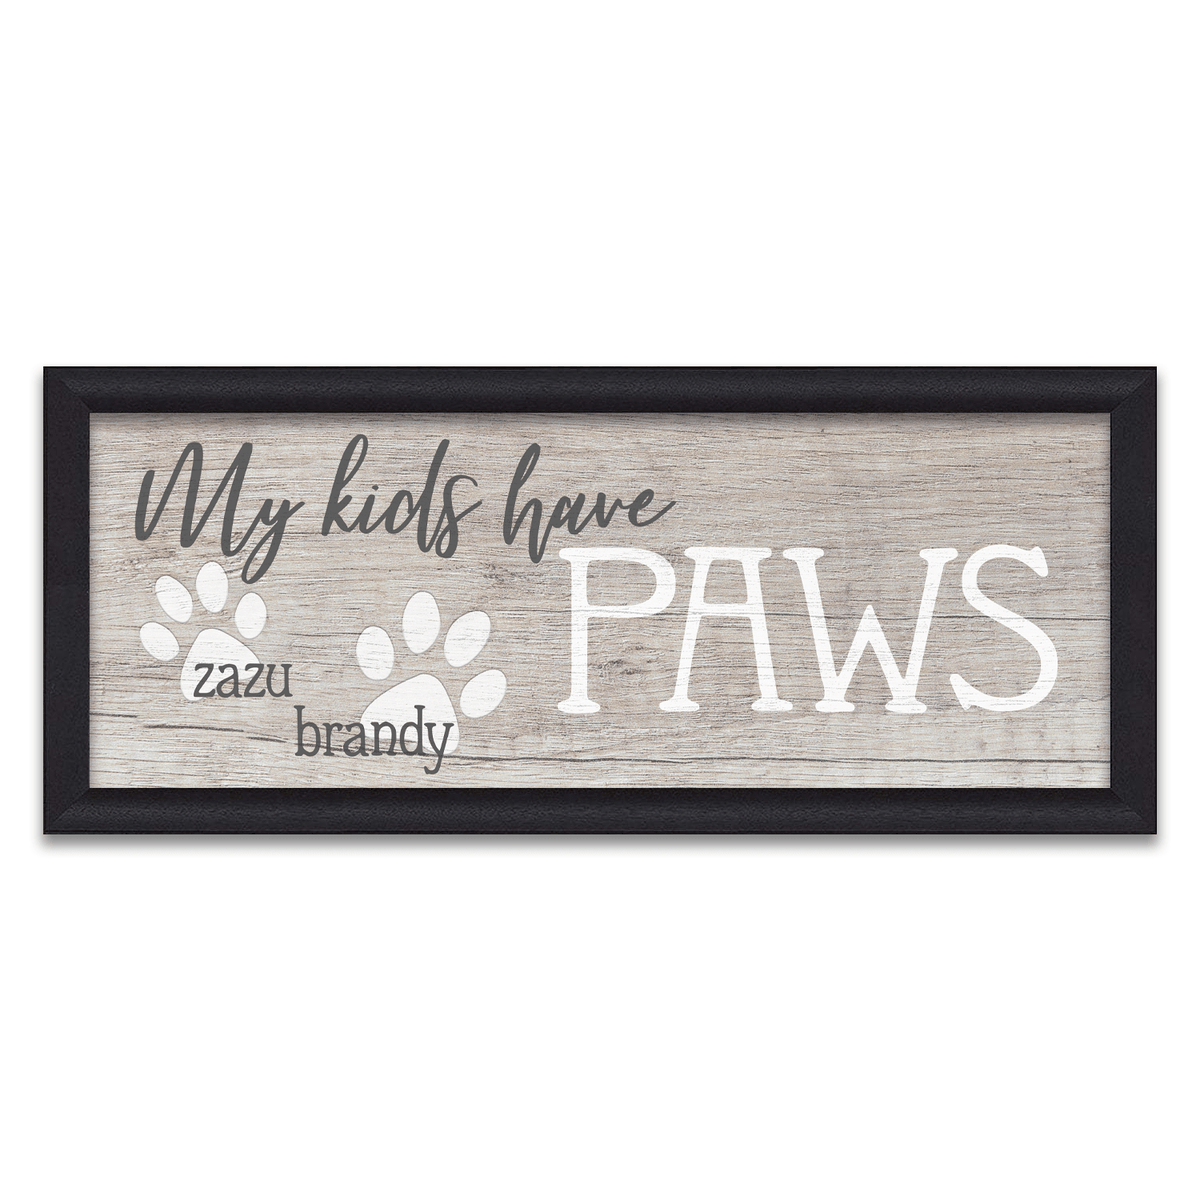 Personalized art for pet dog owners - Framed Canvas from Personal Prints